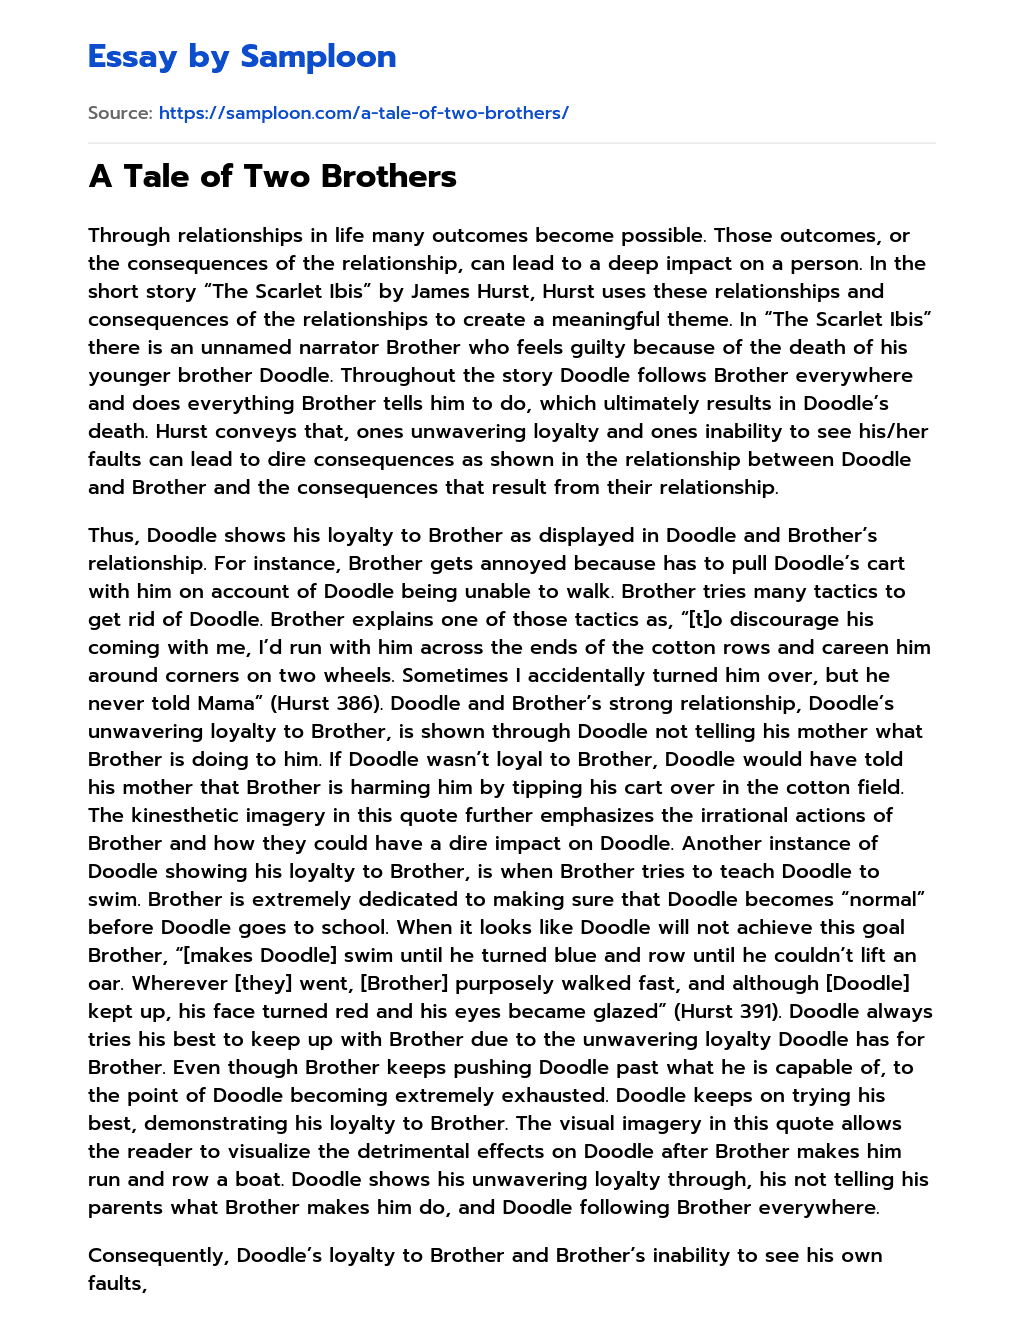 A Tale of Two Brothers essay